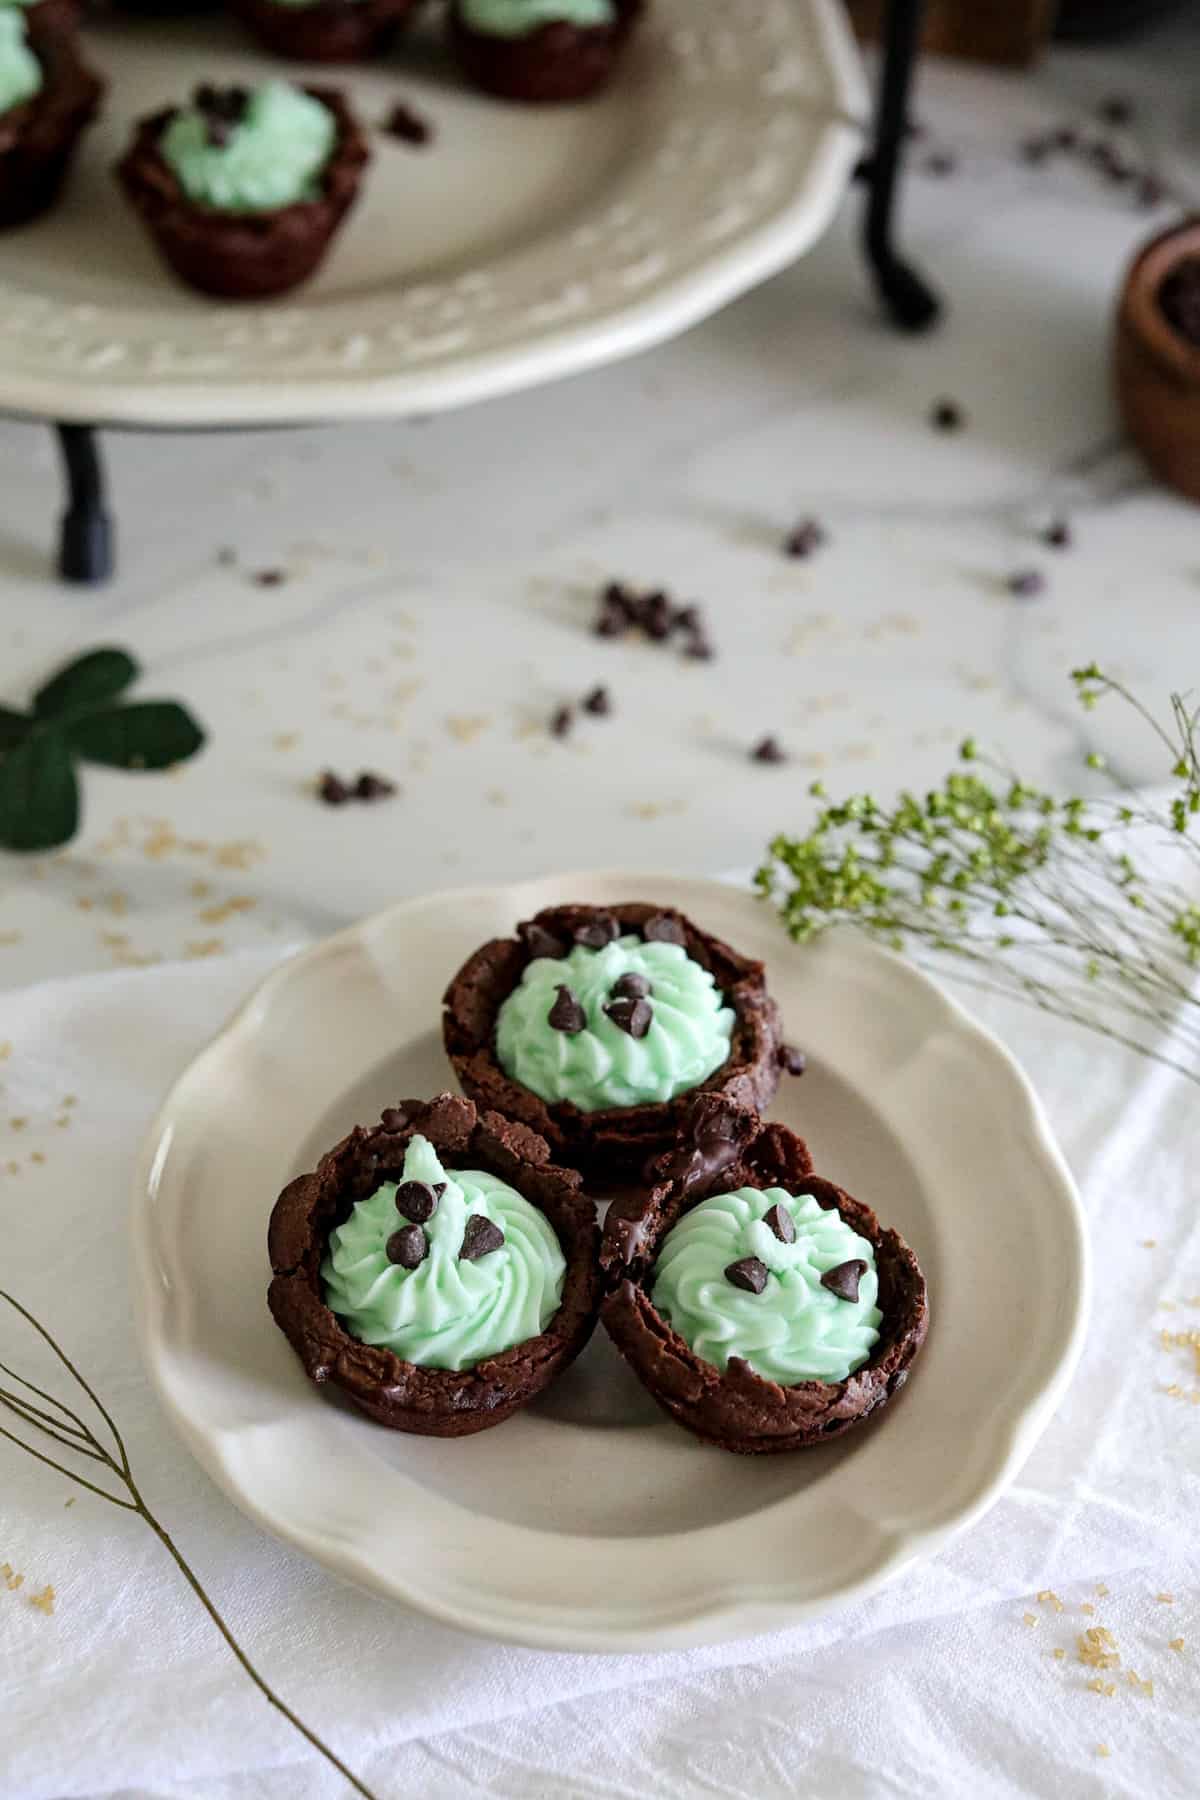 Brownie bites with light green filling with chocolate chips on a white plate on a white tabelcloth.